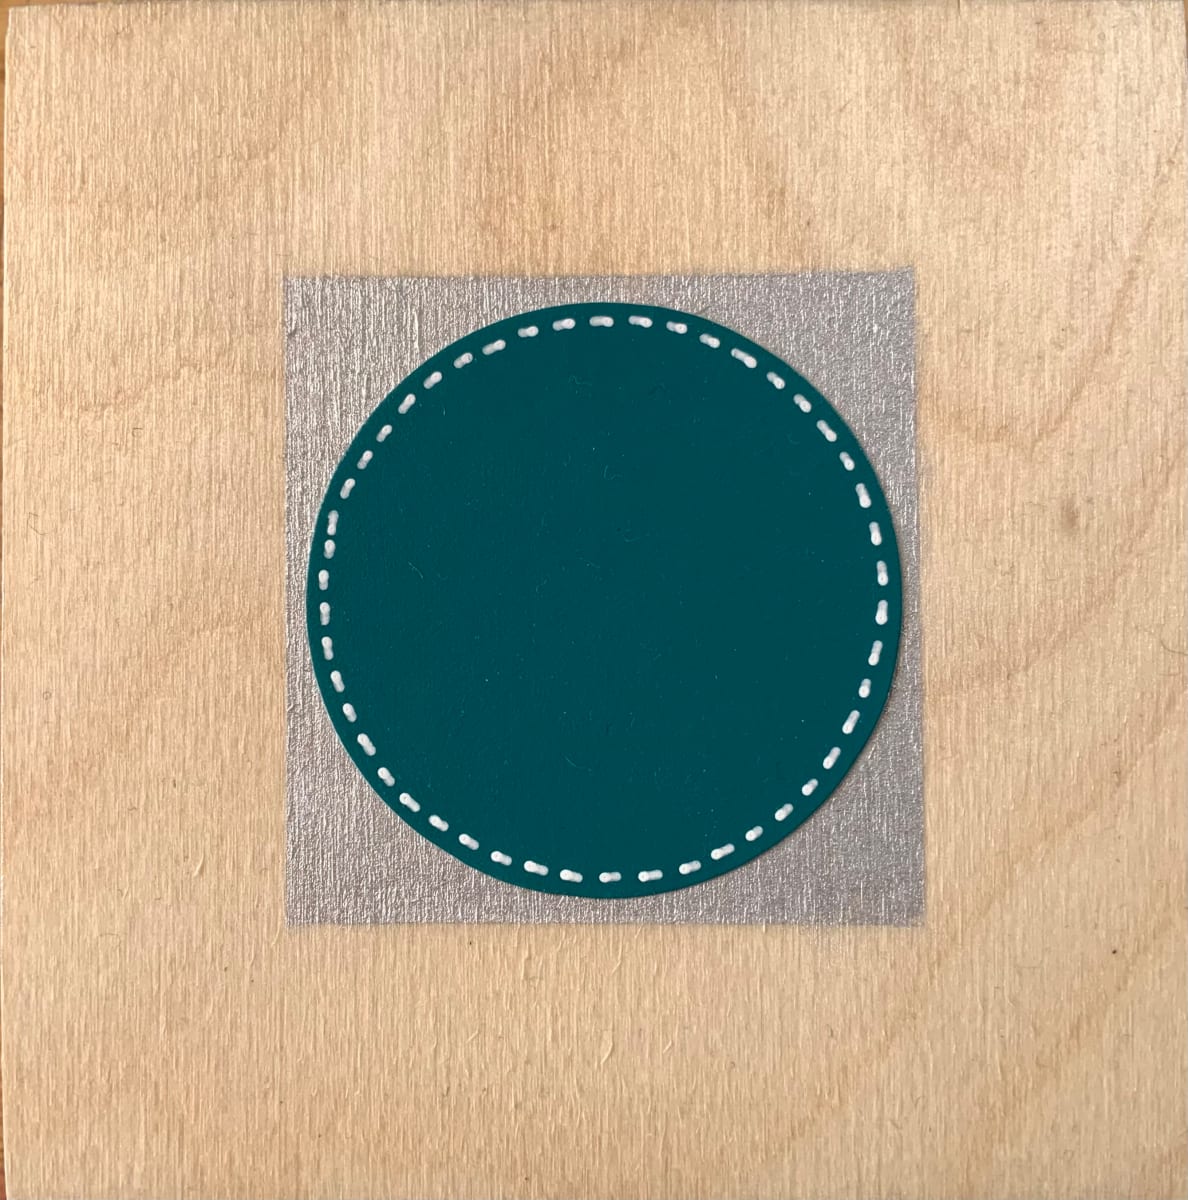 Dots 35, Wood + Silver & Teal  Image: Dots 35, Wood + Silver & Teal | Small Collage Art